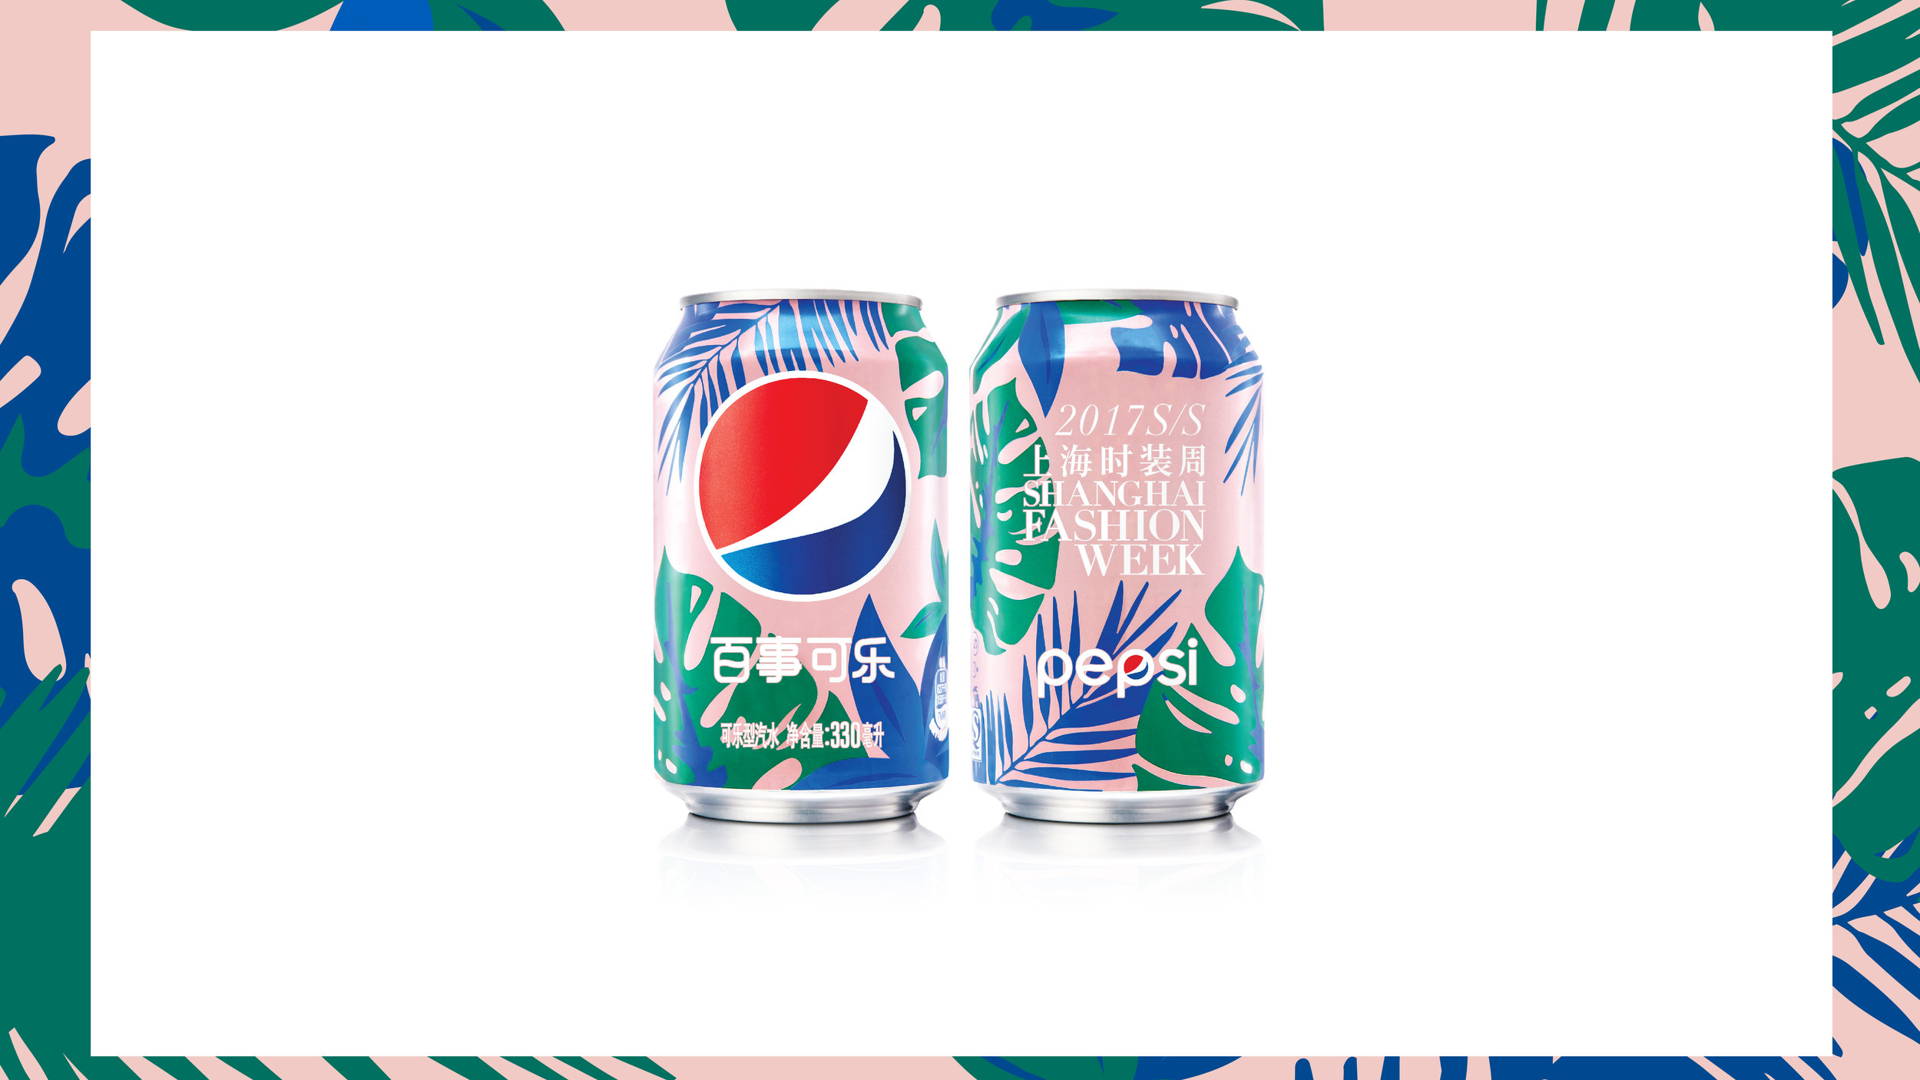 Featured image for Pepsi X Shanghai Fashion Week 